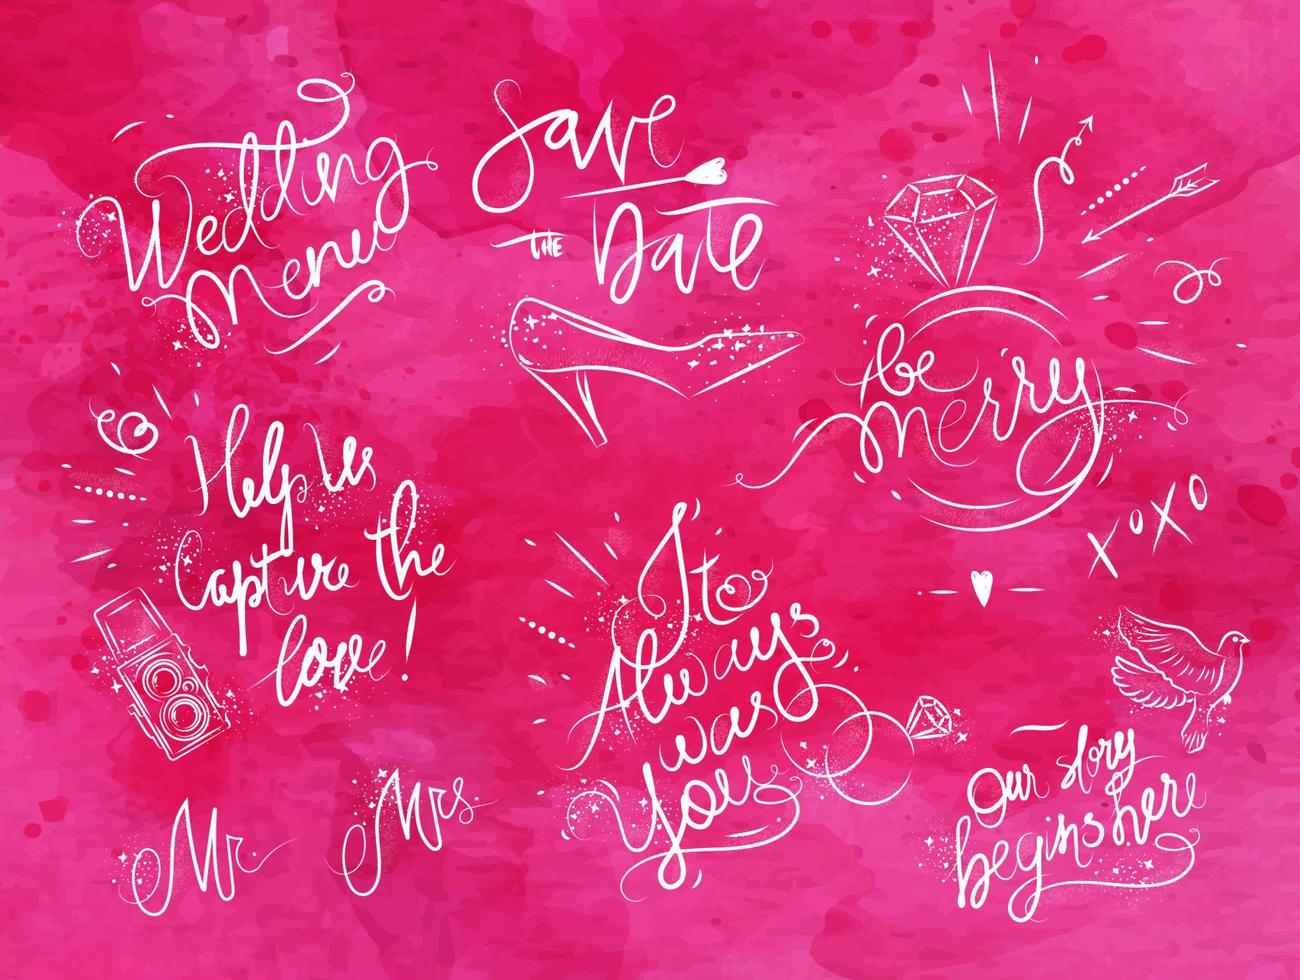 Set of signs on wedding theme drawing with pink ink on black paper vector